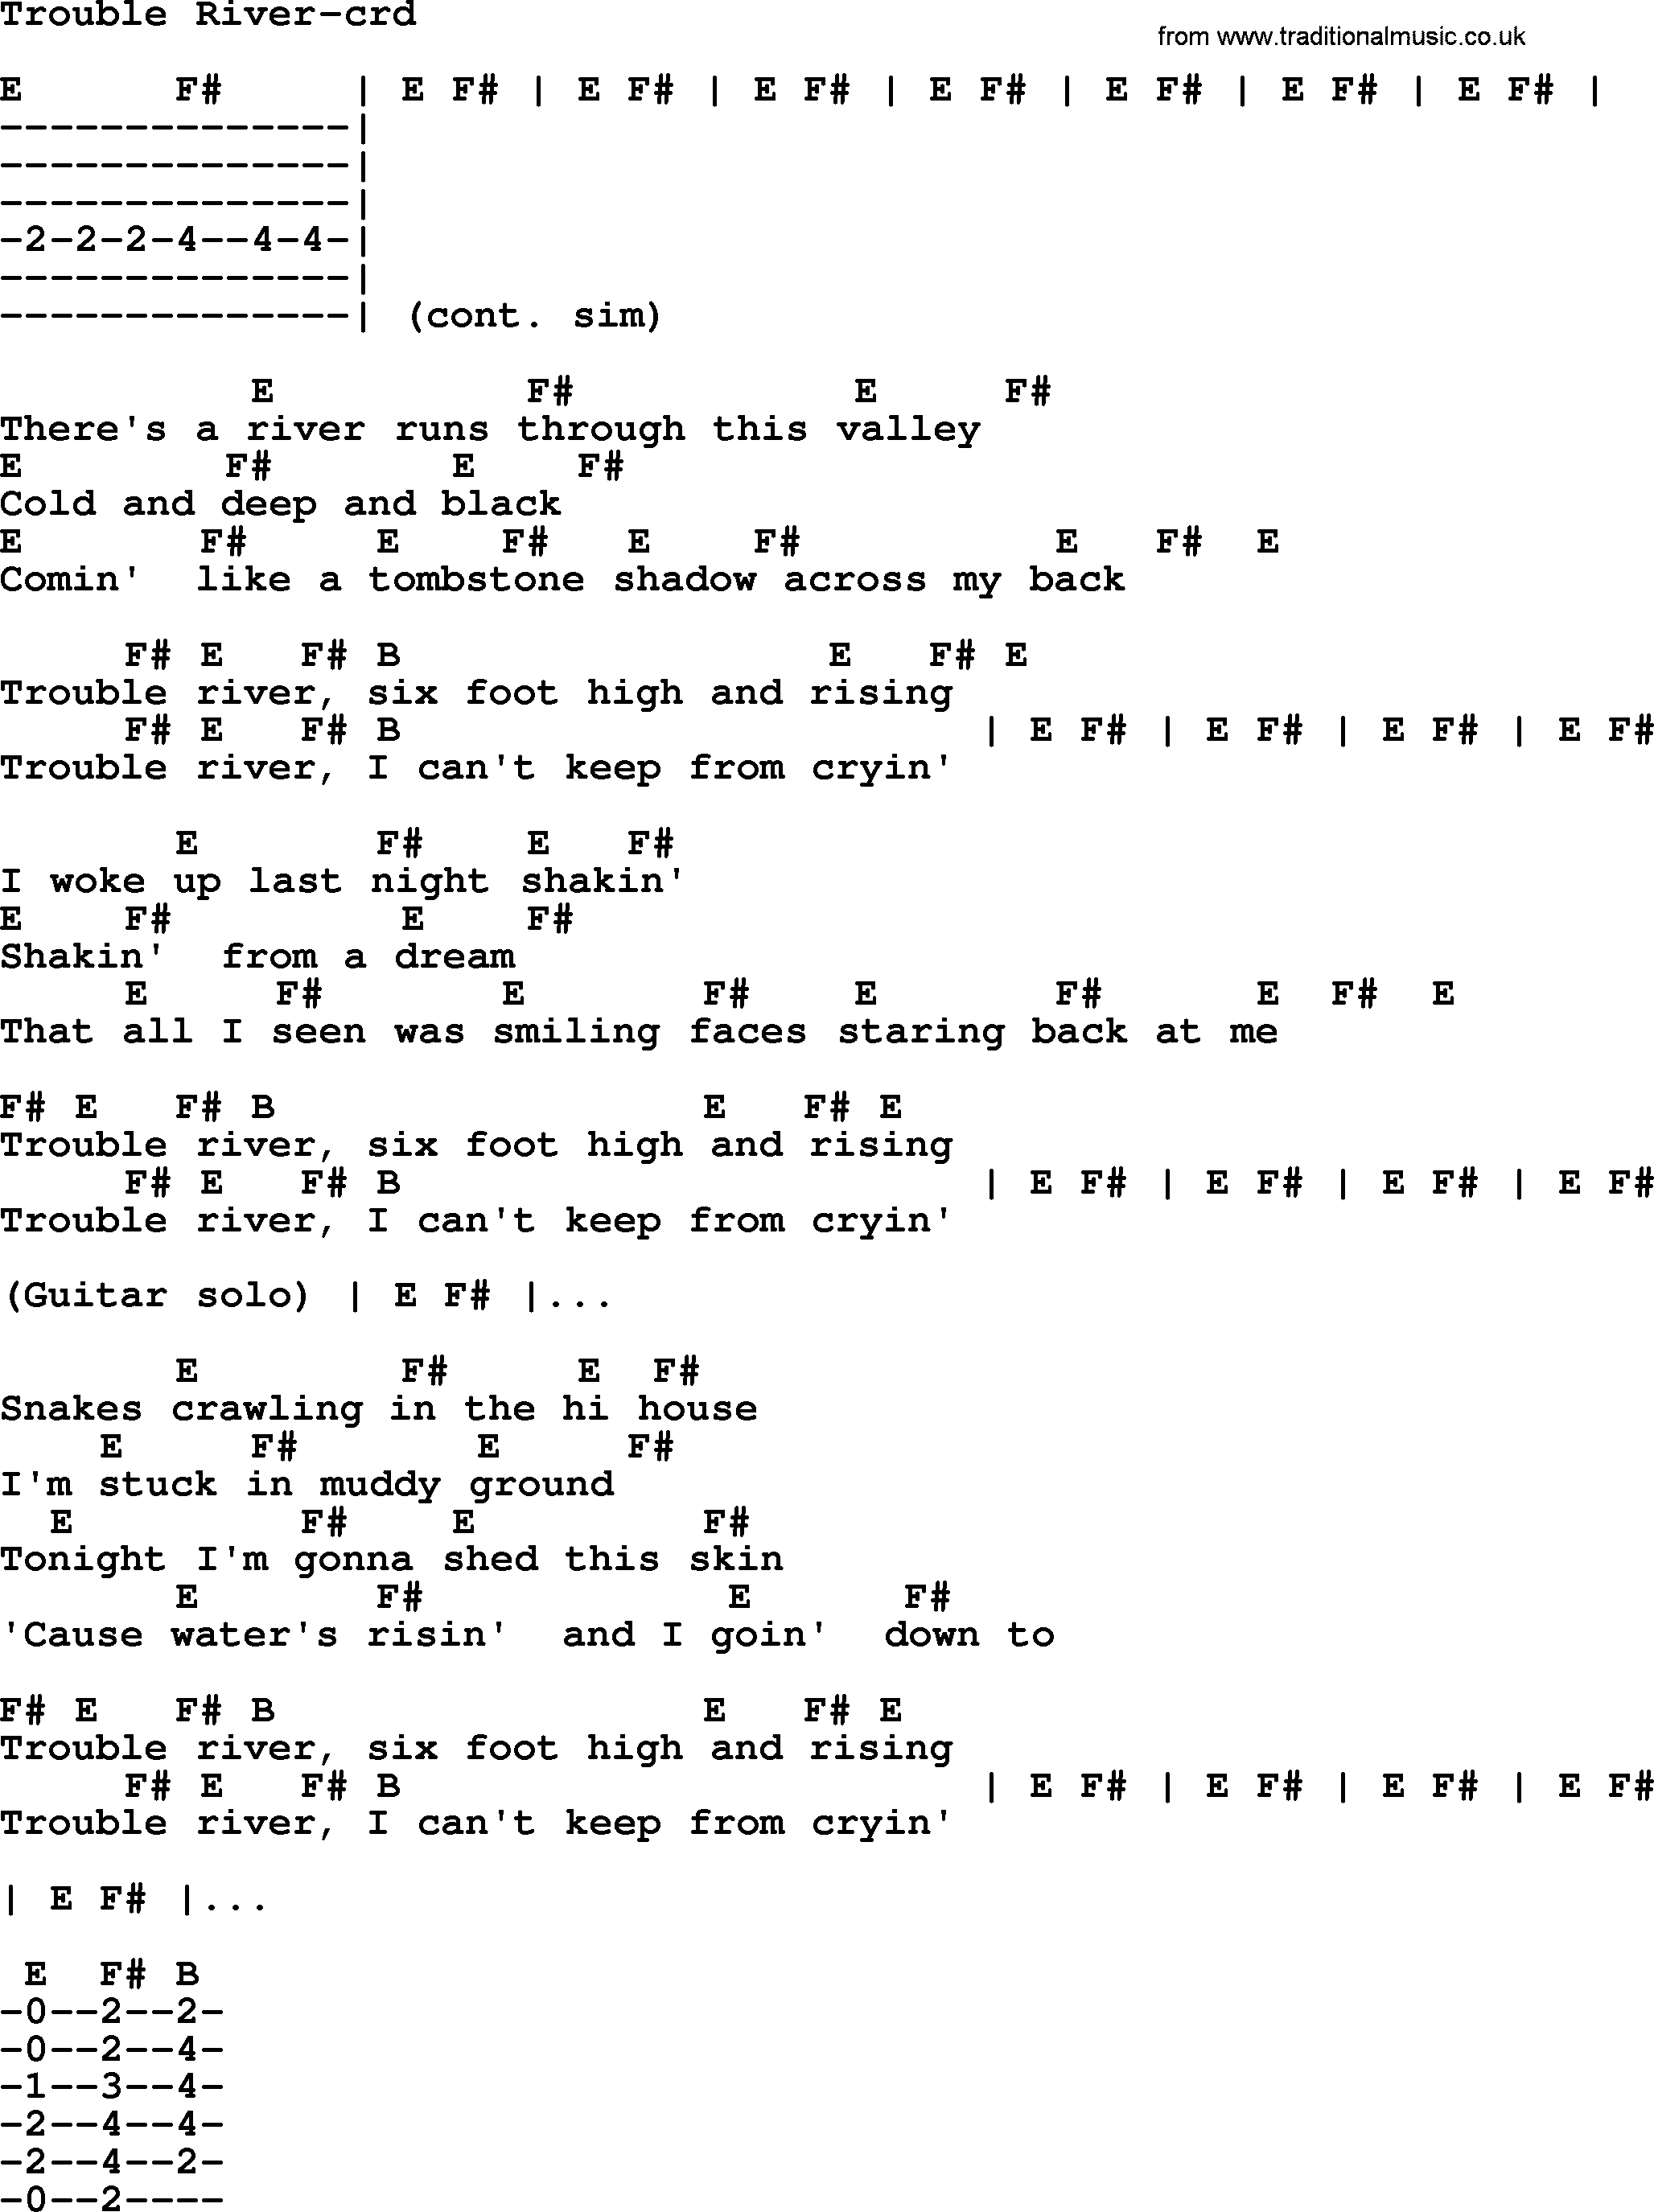 Bruce Springsteen song: Trouble River, lyrics and chords